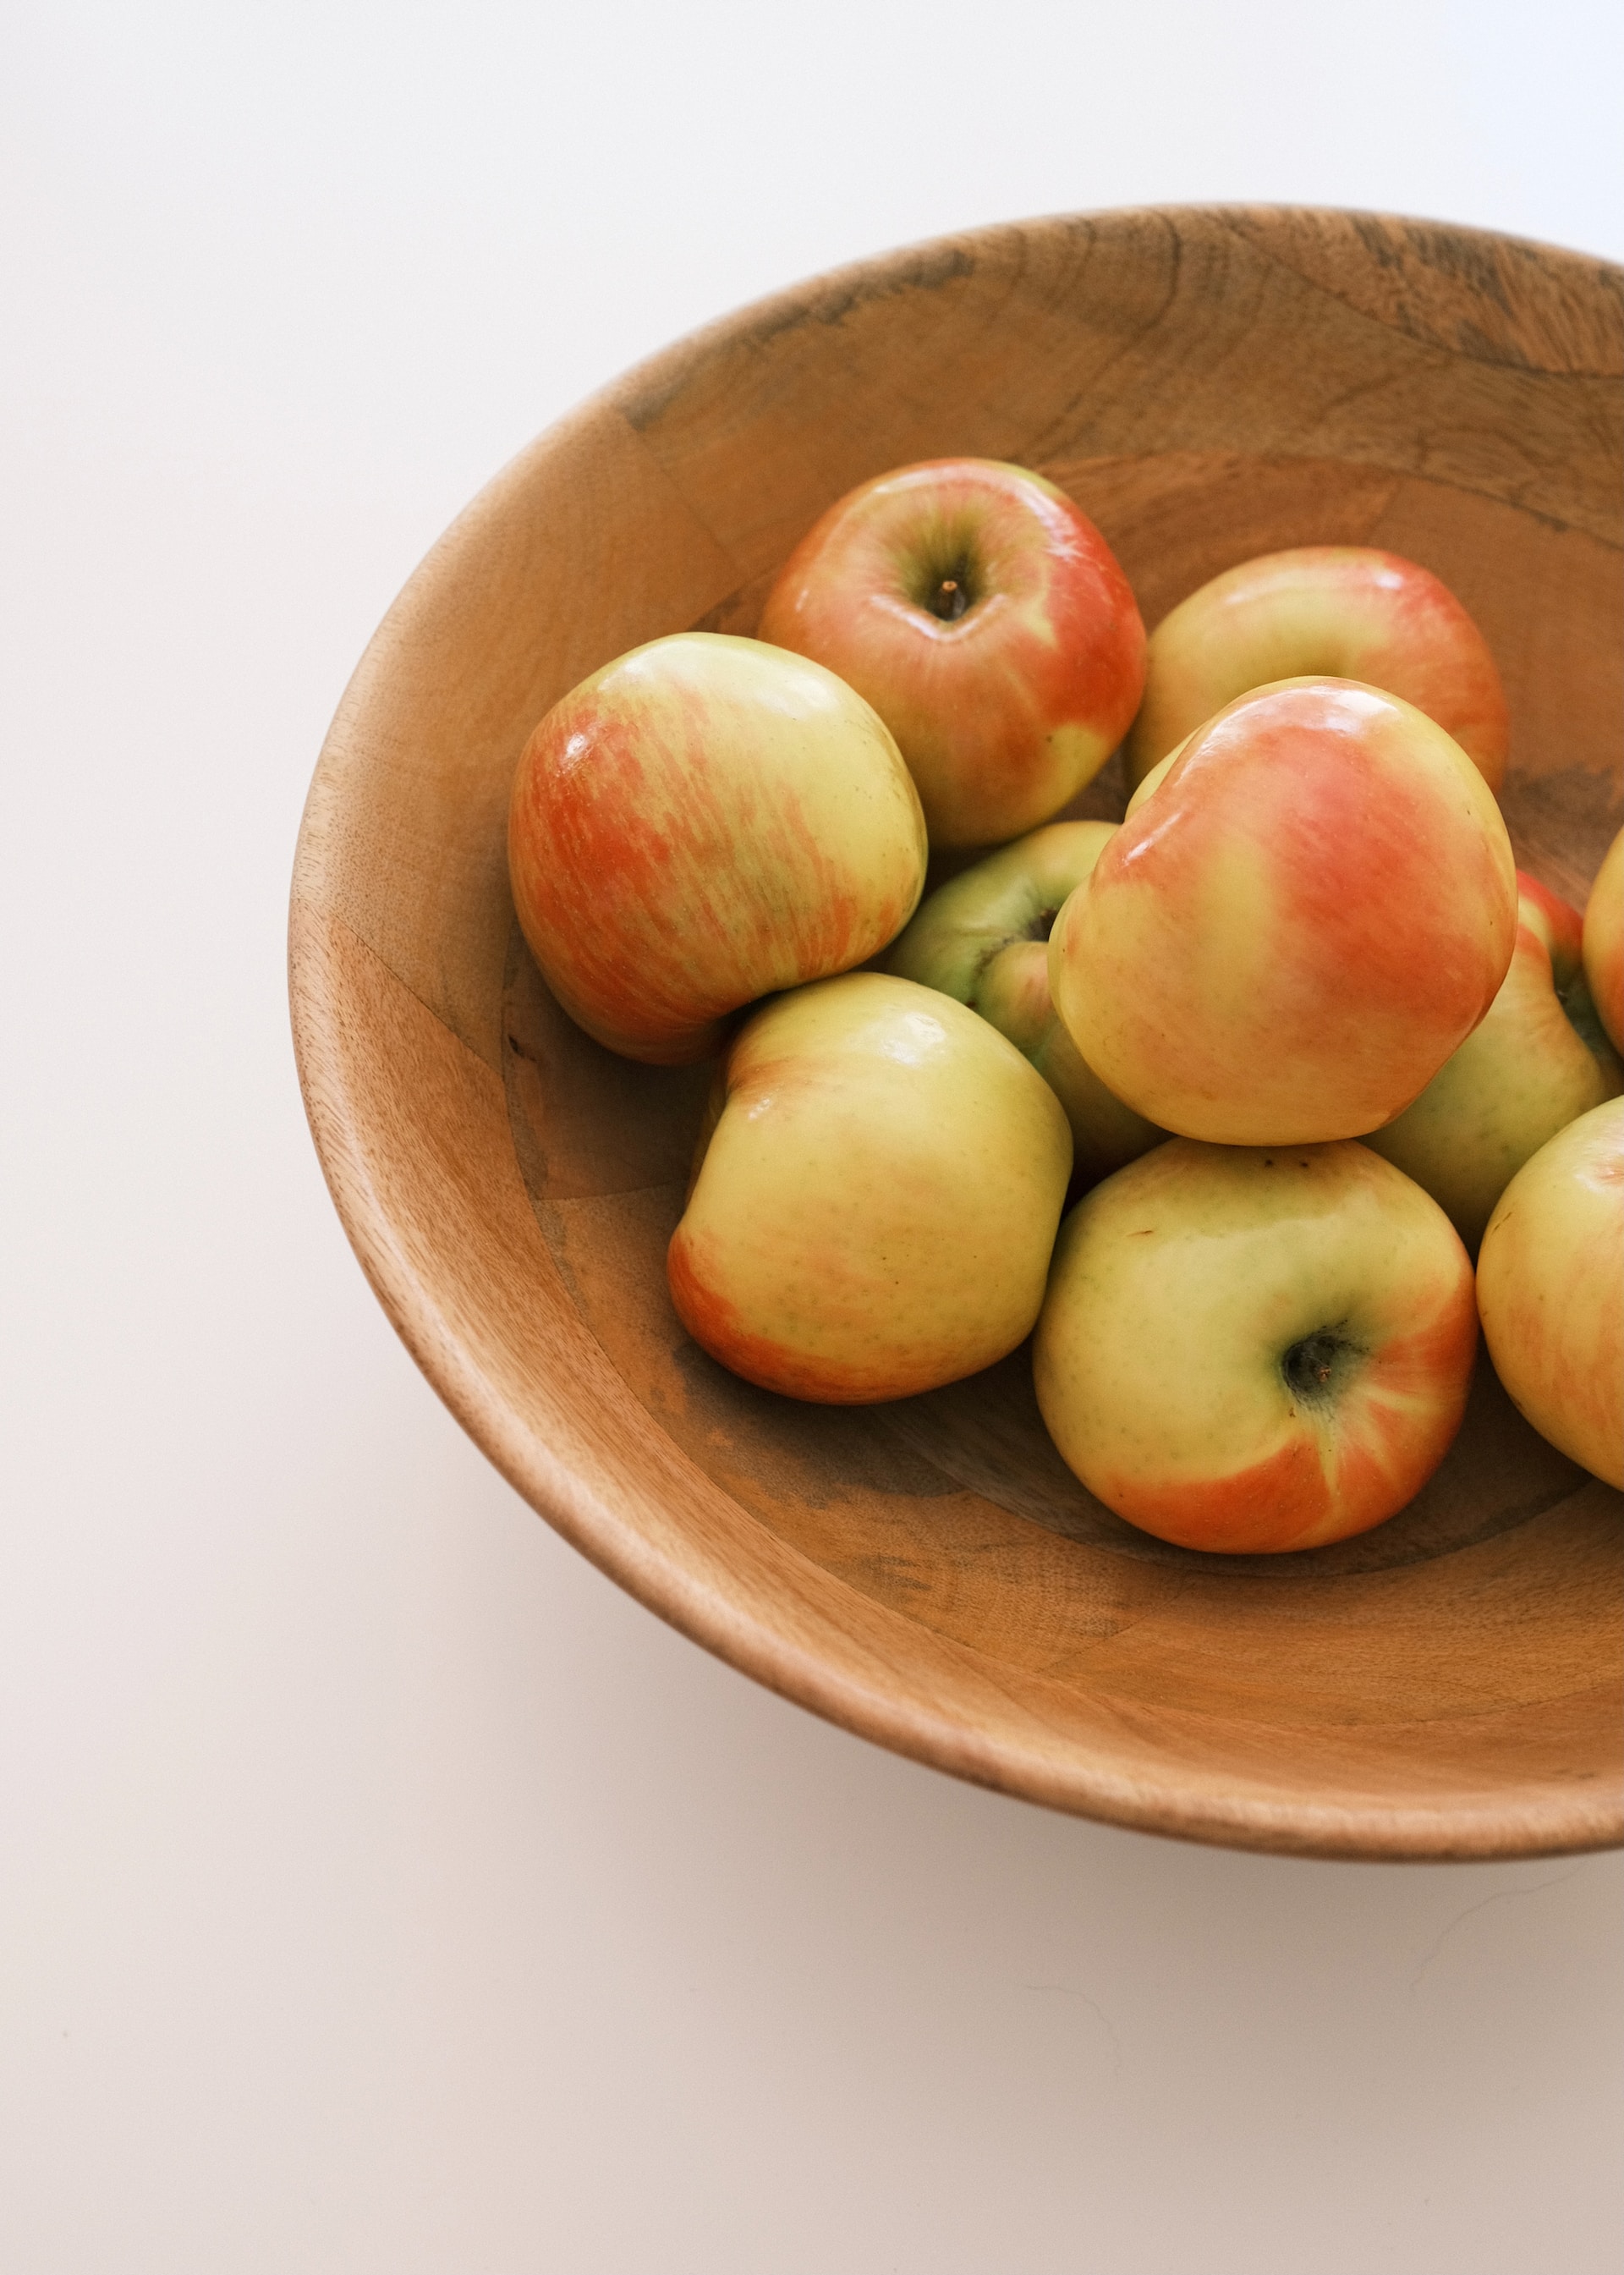 Are Apples Keto? Debunking Myths and Facts in a Keto Diet